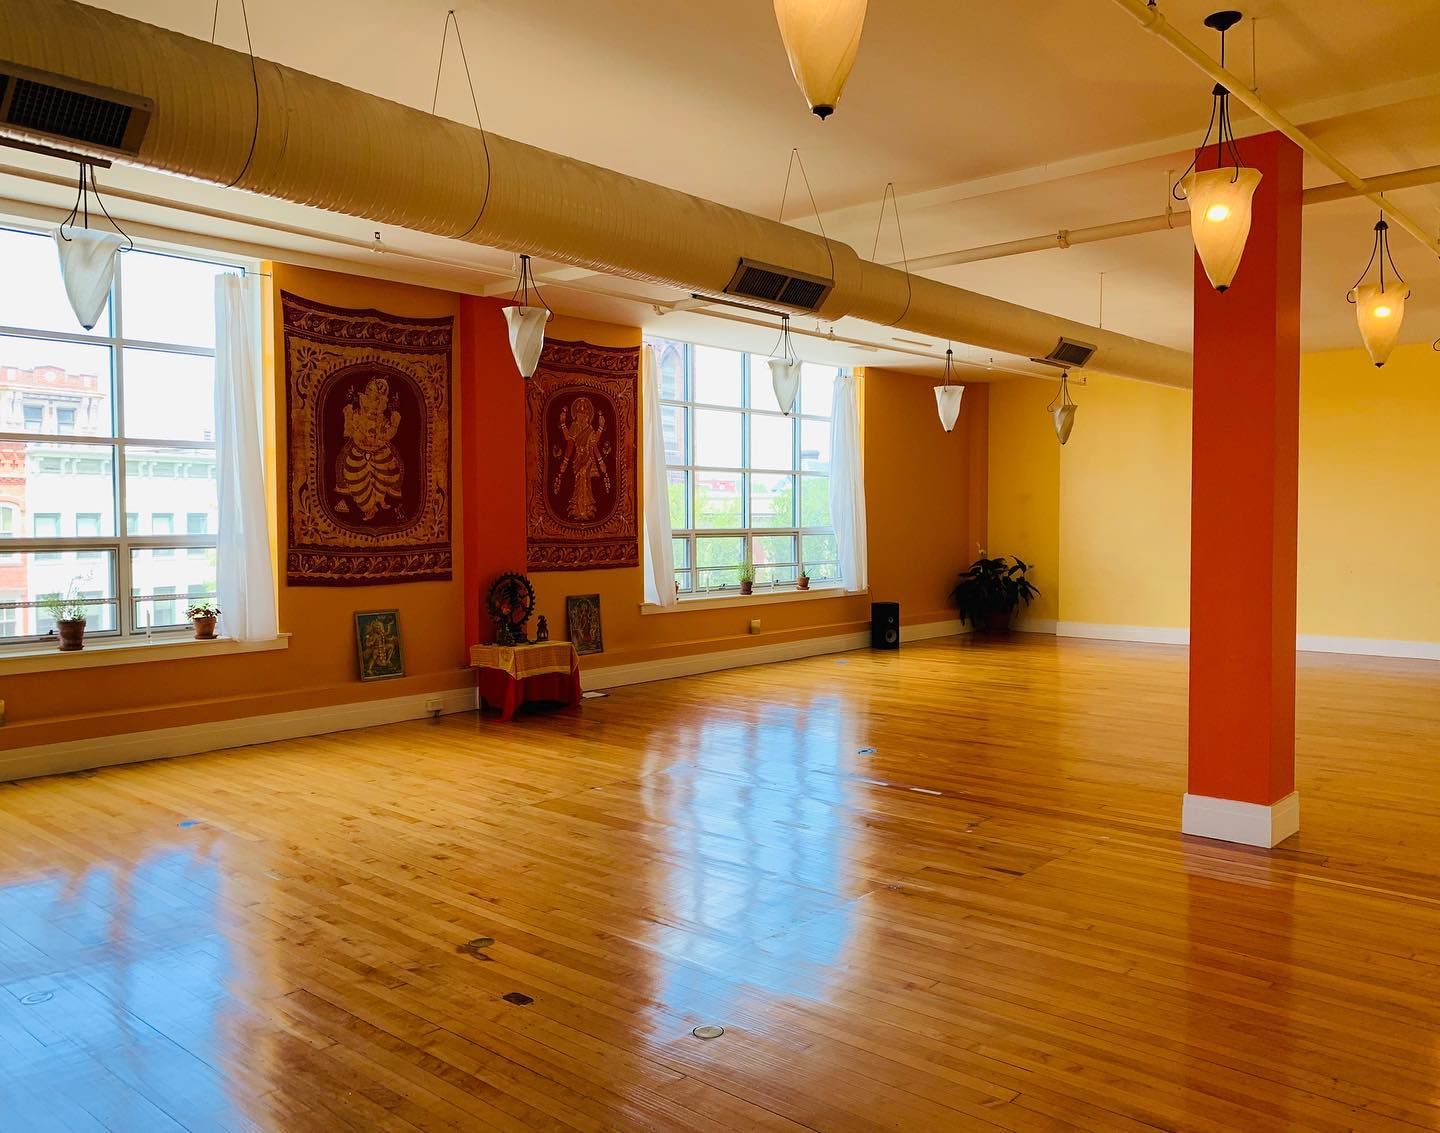 Yoga Sanctuary is your go-to place for yoga classes in Thornes!